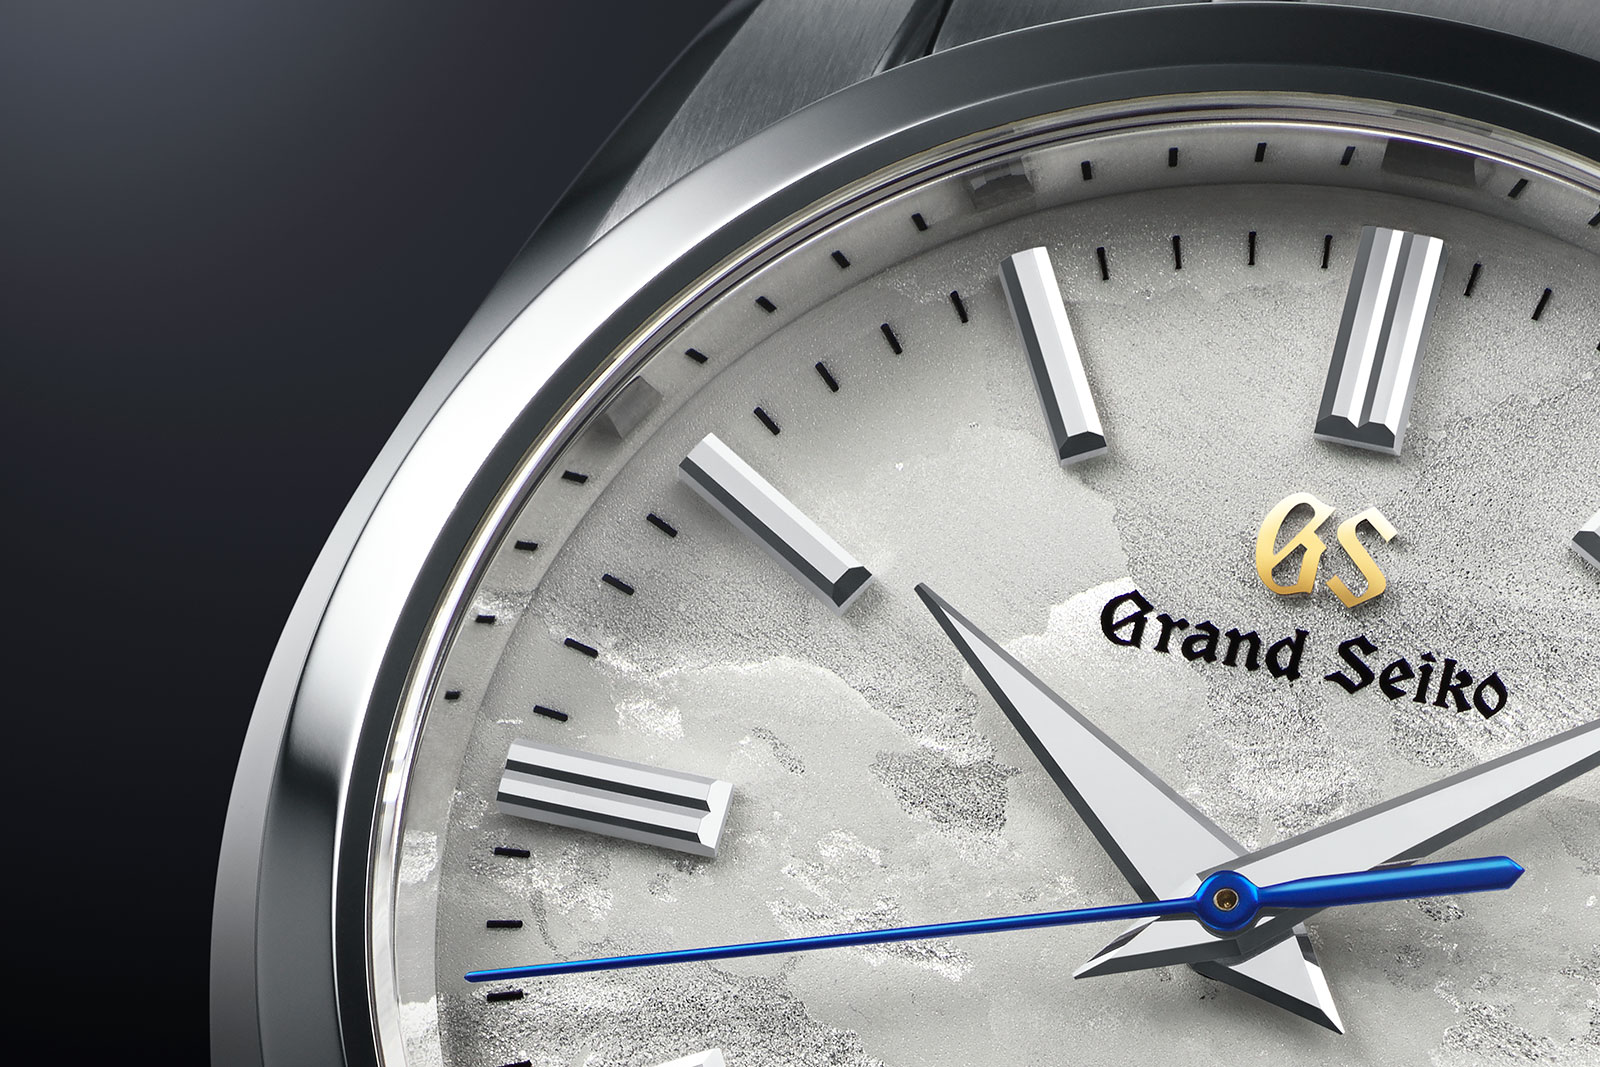 Grand Seiko Introduces the Caliber 9S 25th Anniversary SBGH311 and SBGR325  | SJX Watches